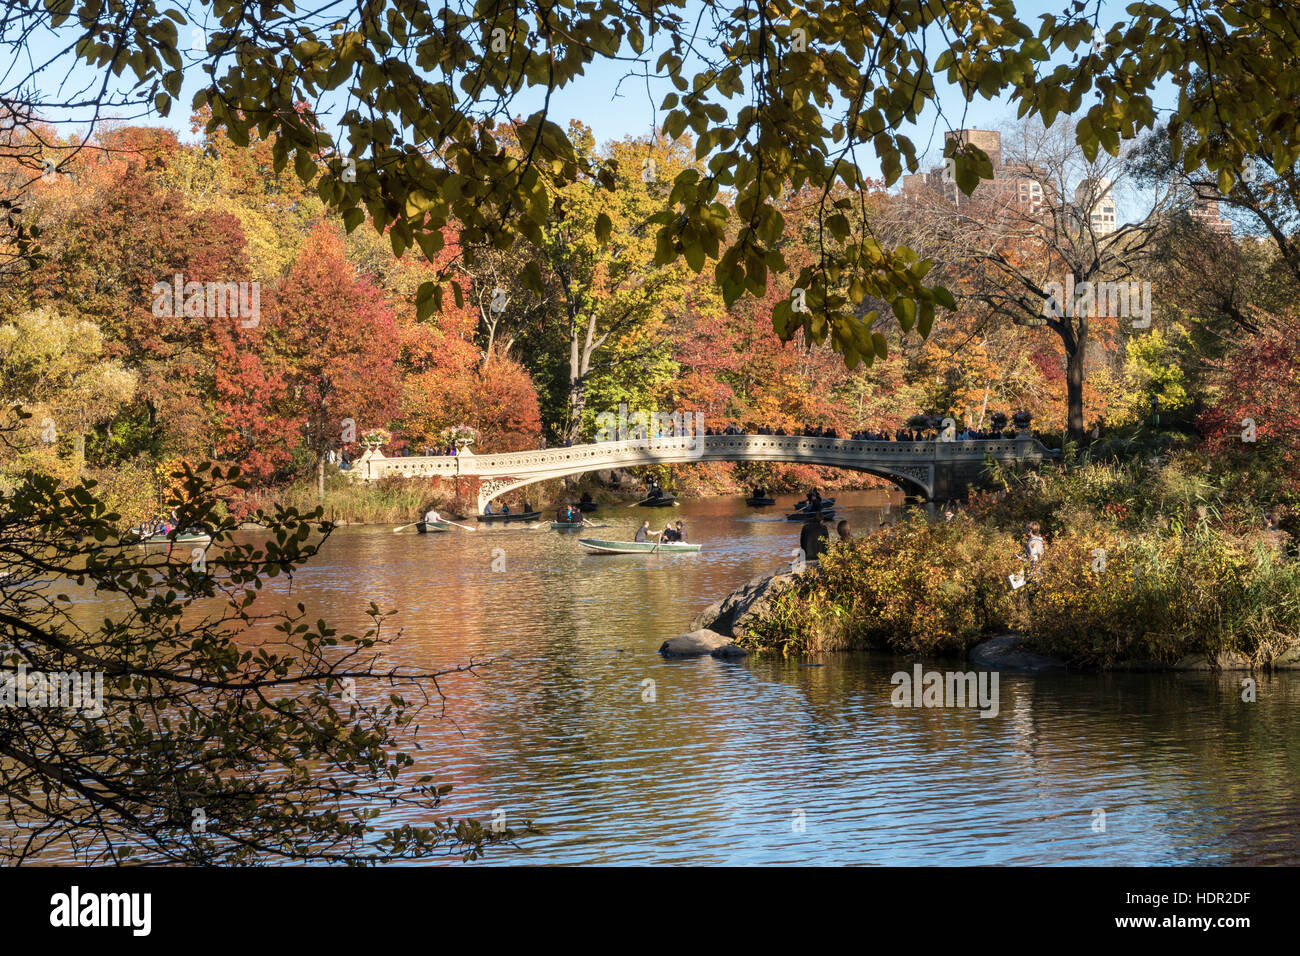 The Lake with Bow Bridge in Central Park, NYC Stock Photo - Alamy